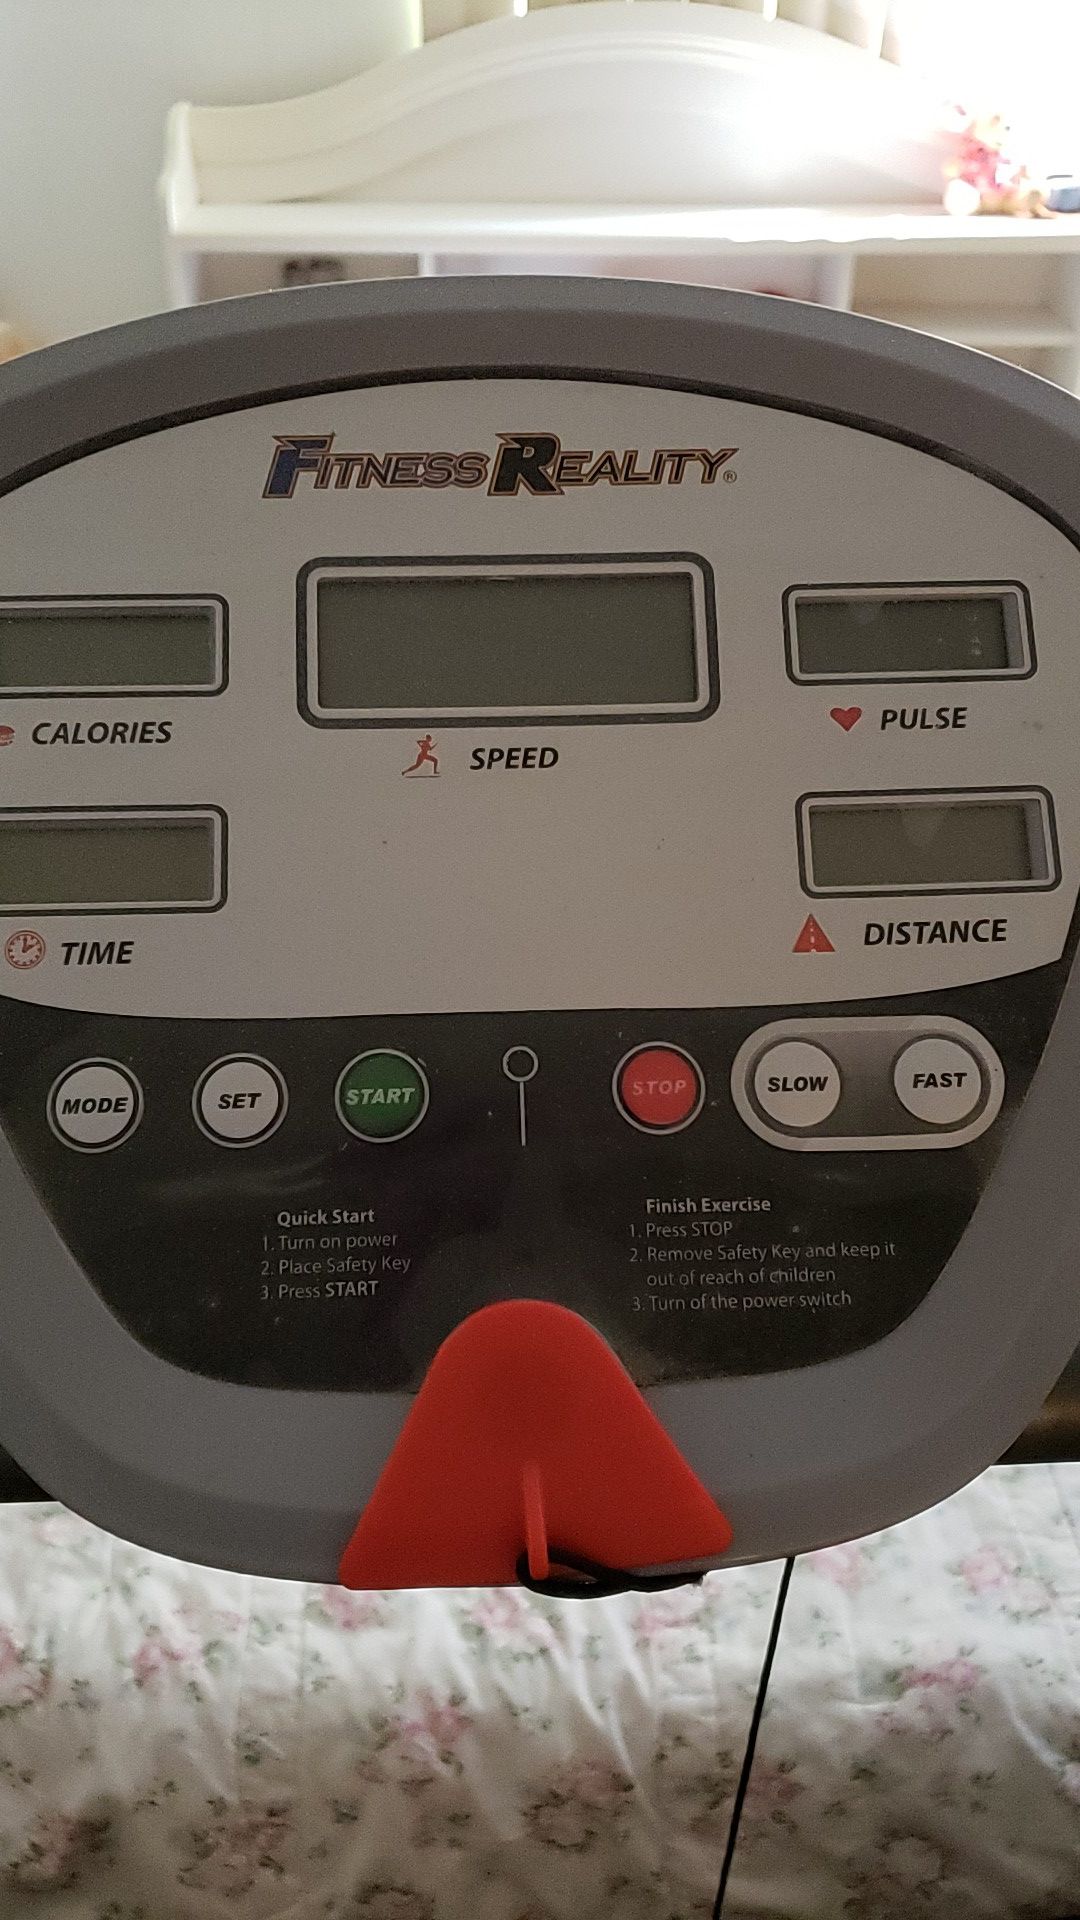 $50 OBO Fitness Reality Automatic Treadmill call Sherry {contact info removed}